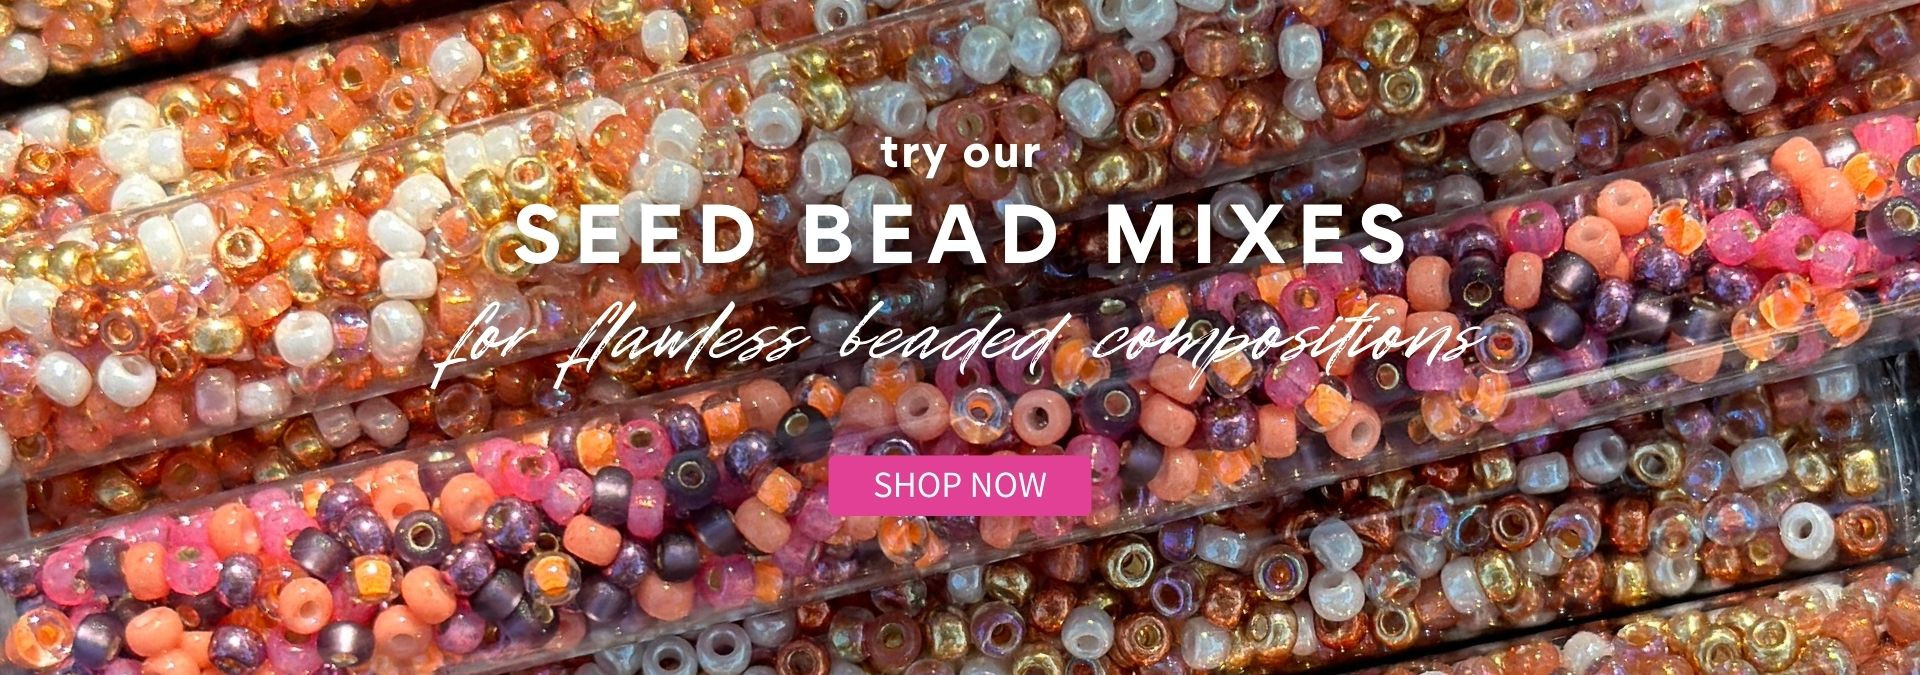 Try our Seed Bead Mixes